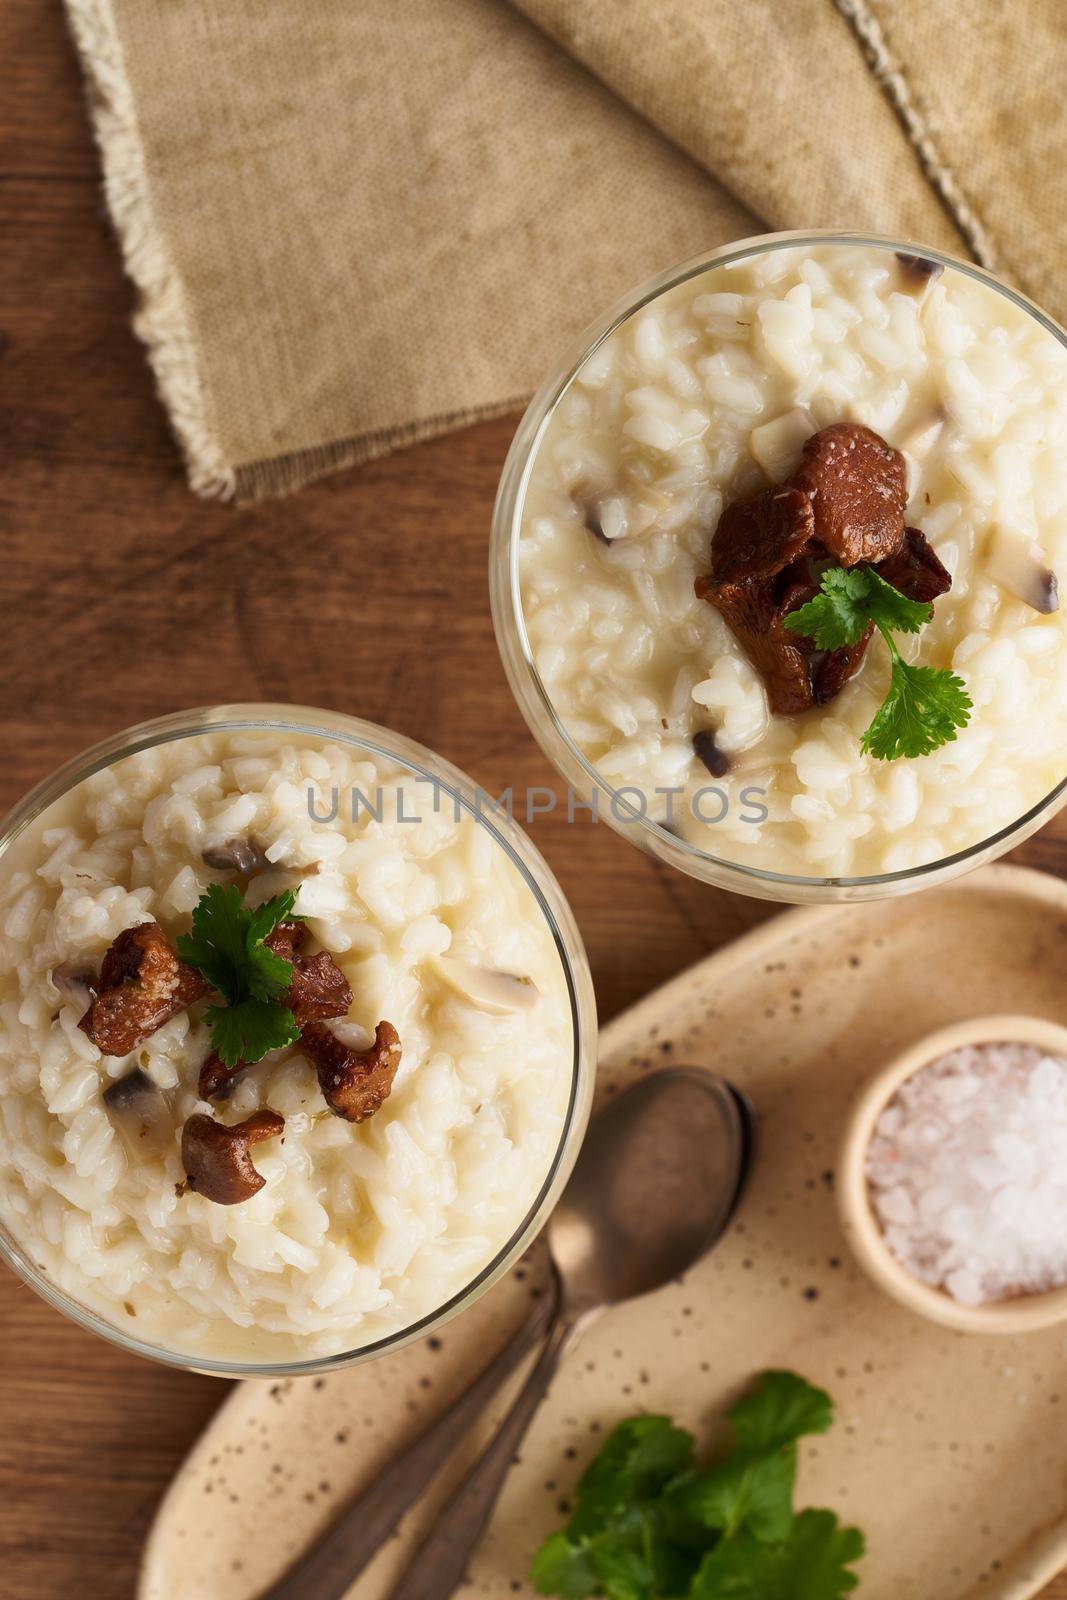 Risotto with mushrooms in wine glass. Unconventional unusual serving. Rice porridge with mushrooms. Wooden old table. Hot dish in glass bowl. Top view, selective focus